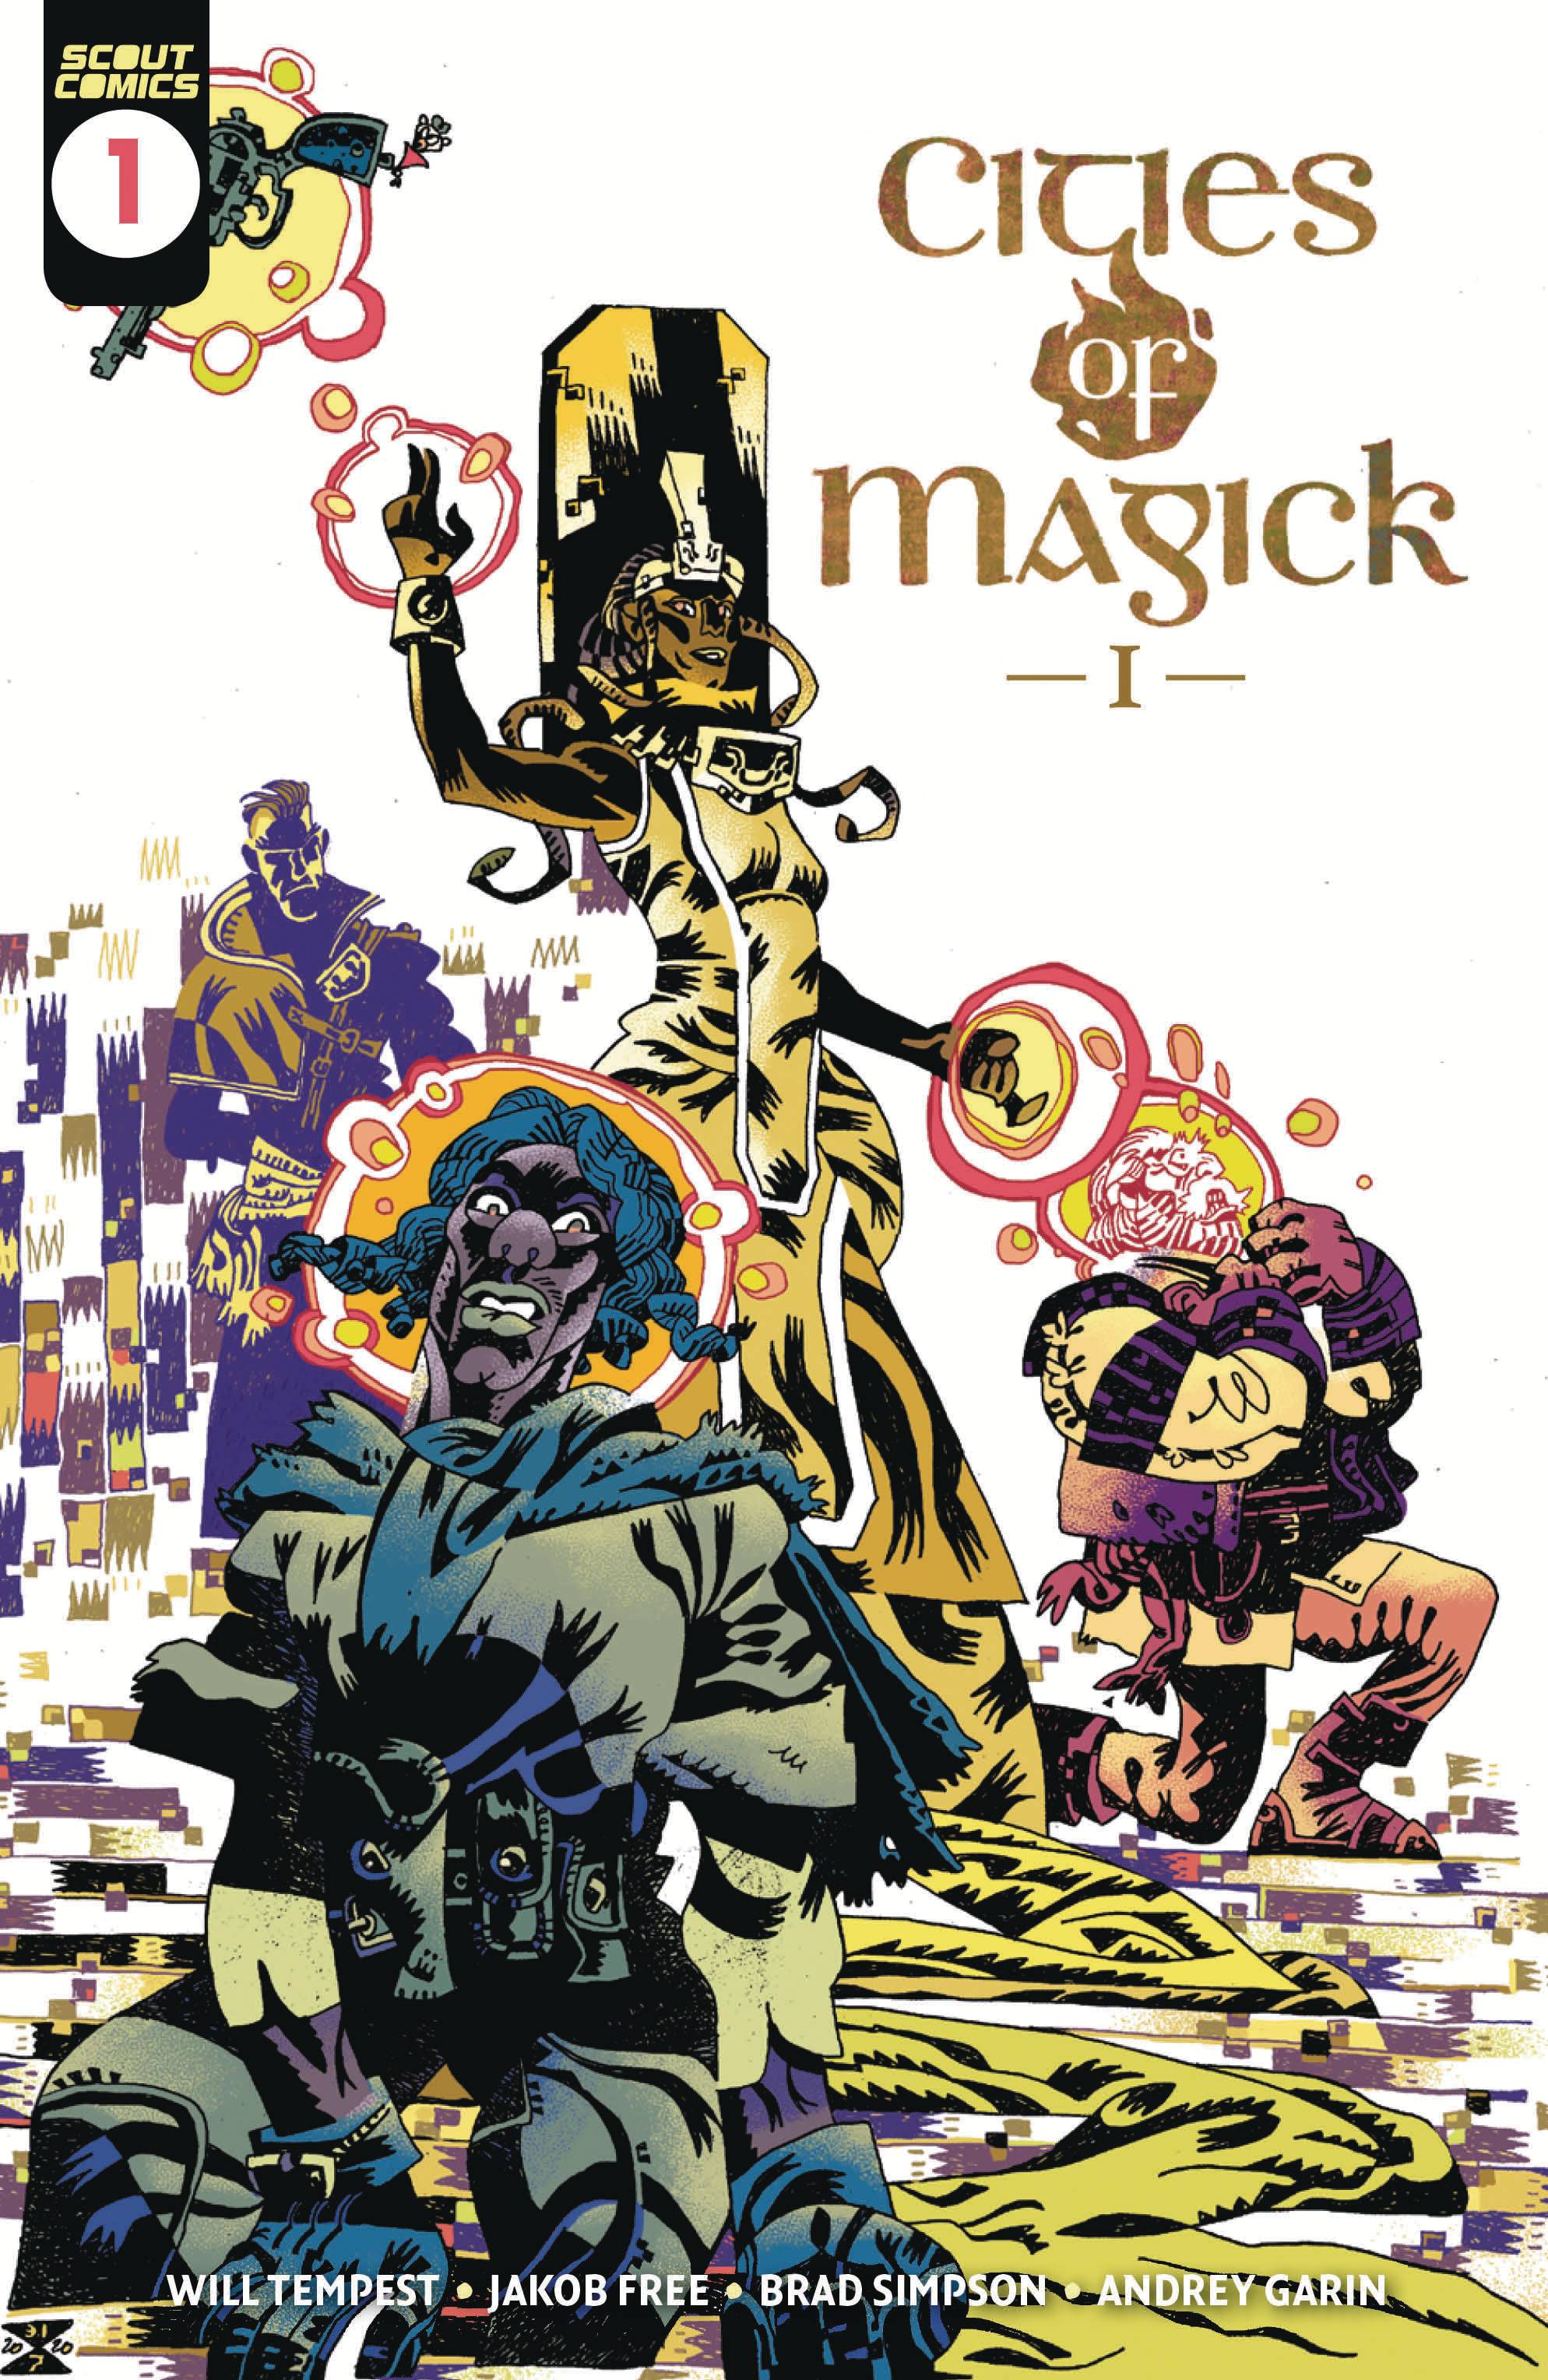 CITIES OF MAGICK #1 1:10 Retailer Incentive Variant